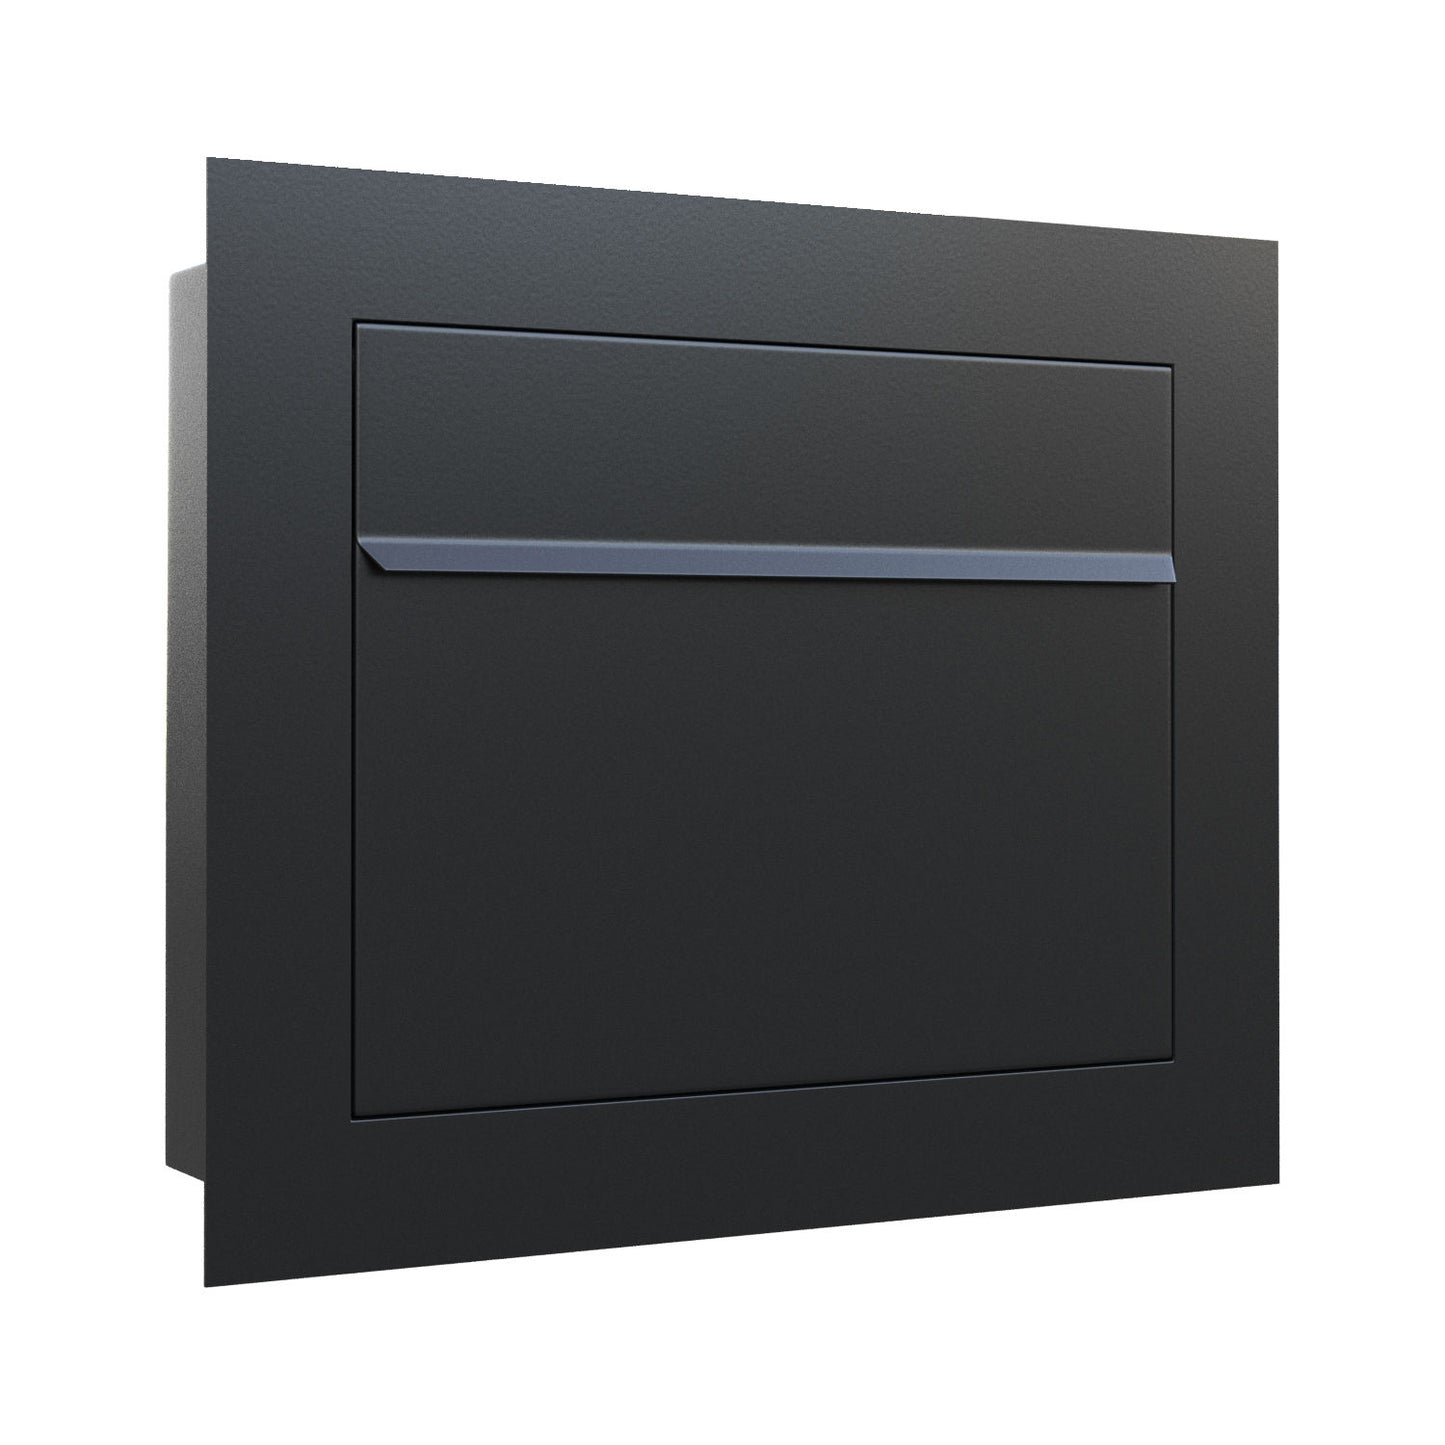 CUBIC 1 Built-in - Embedded or column locking mailbox in black